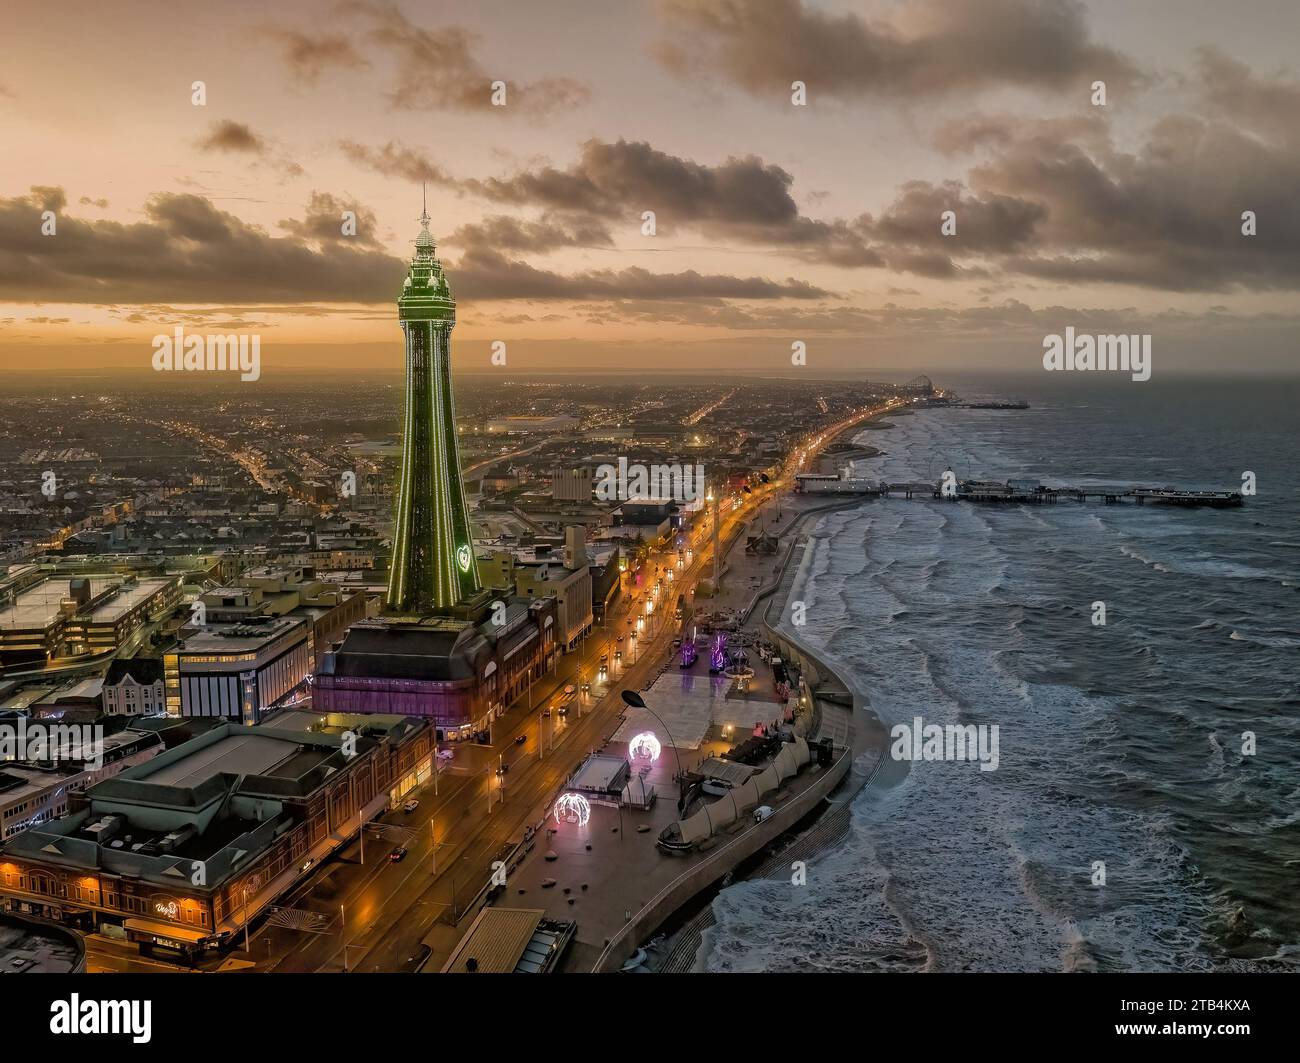 Blackpool, Lancashire, United Kingdom.Blackpool sea front and tower aerial view at dusk with illuminations looking towards the pier and pleasure beach Stock Photo